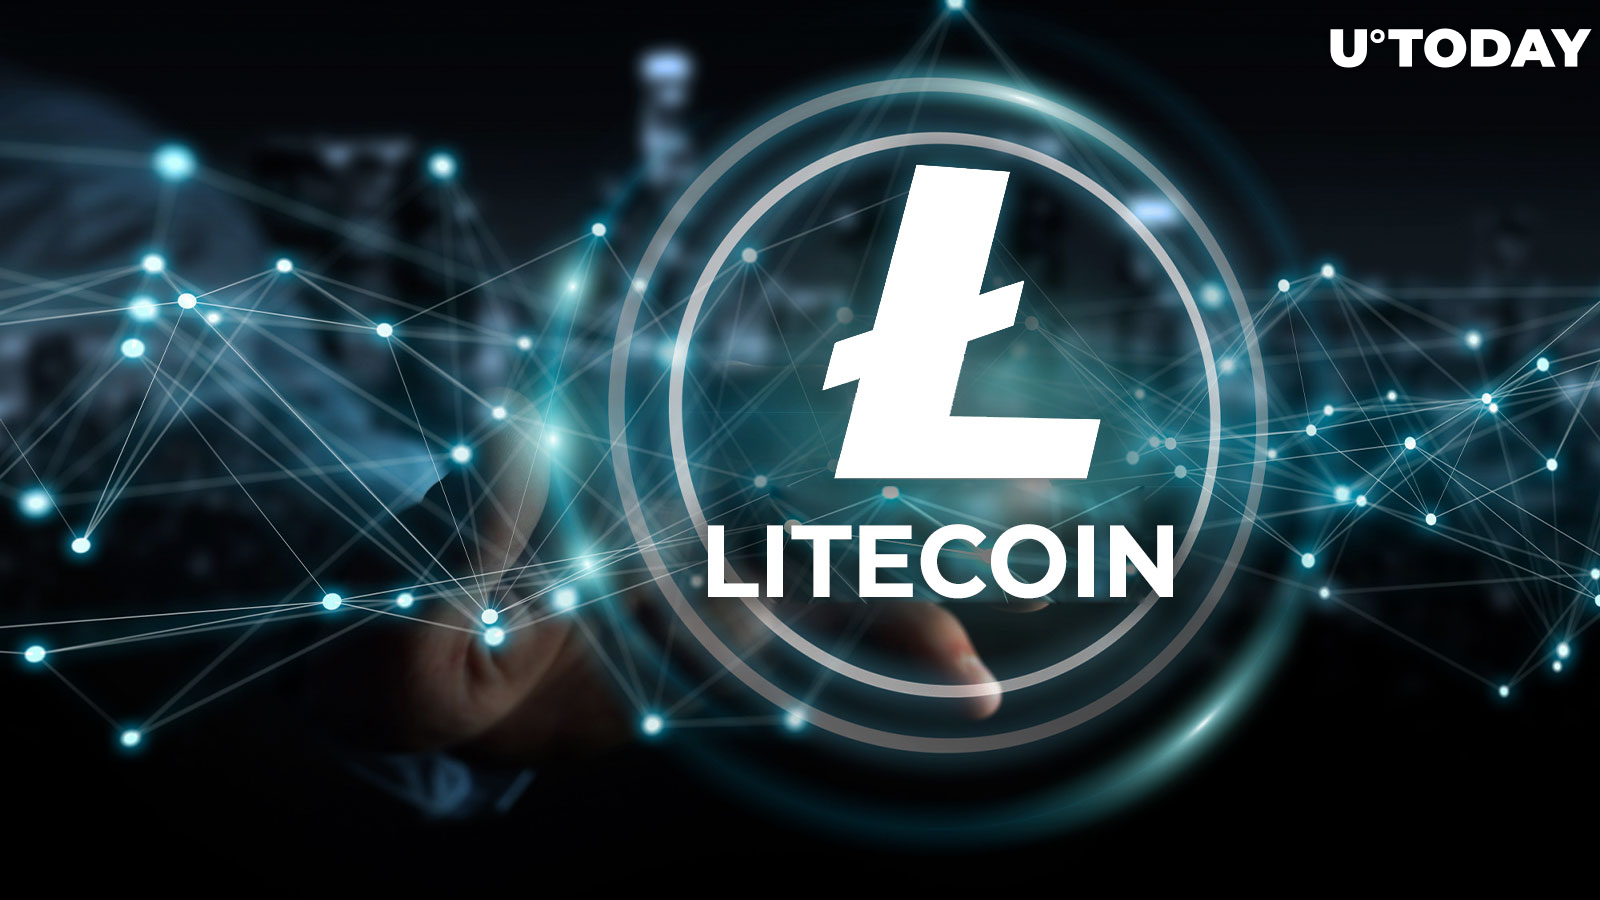 Litecoin Turns 12: Here's How It Started